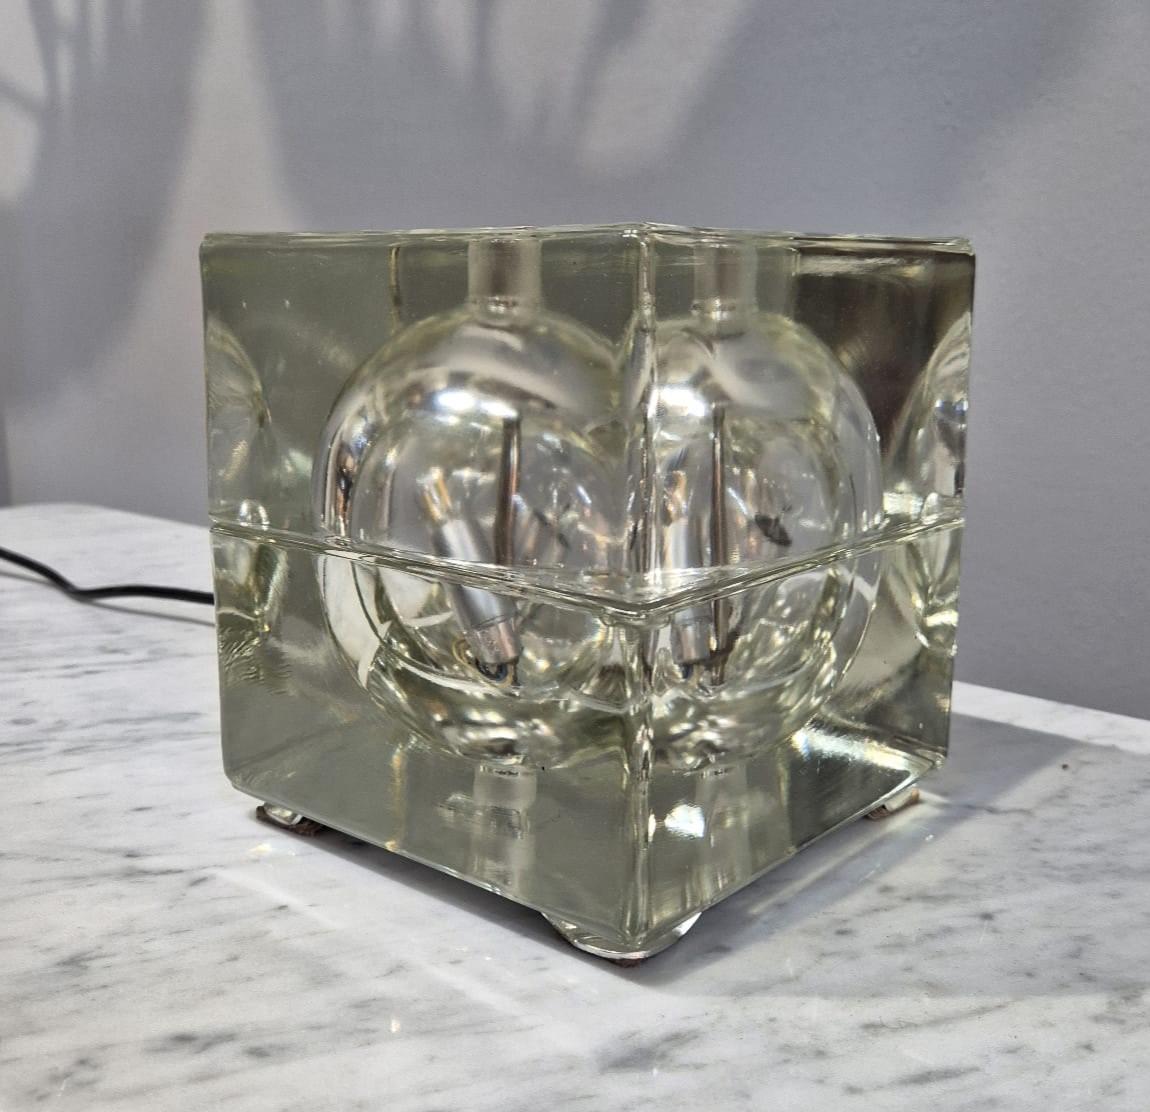 Cubosfera table lamp, designed byAlessandro Mendini in 1968.
This lamp, produced by Fidenza Vetraria, is composed of a crystalline glass, formed into a cube. The lamp rests on four metal legs and is equipped with two lamps.